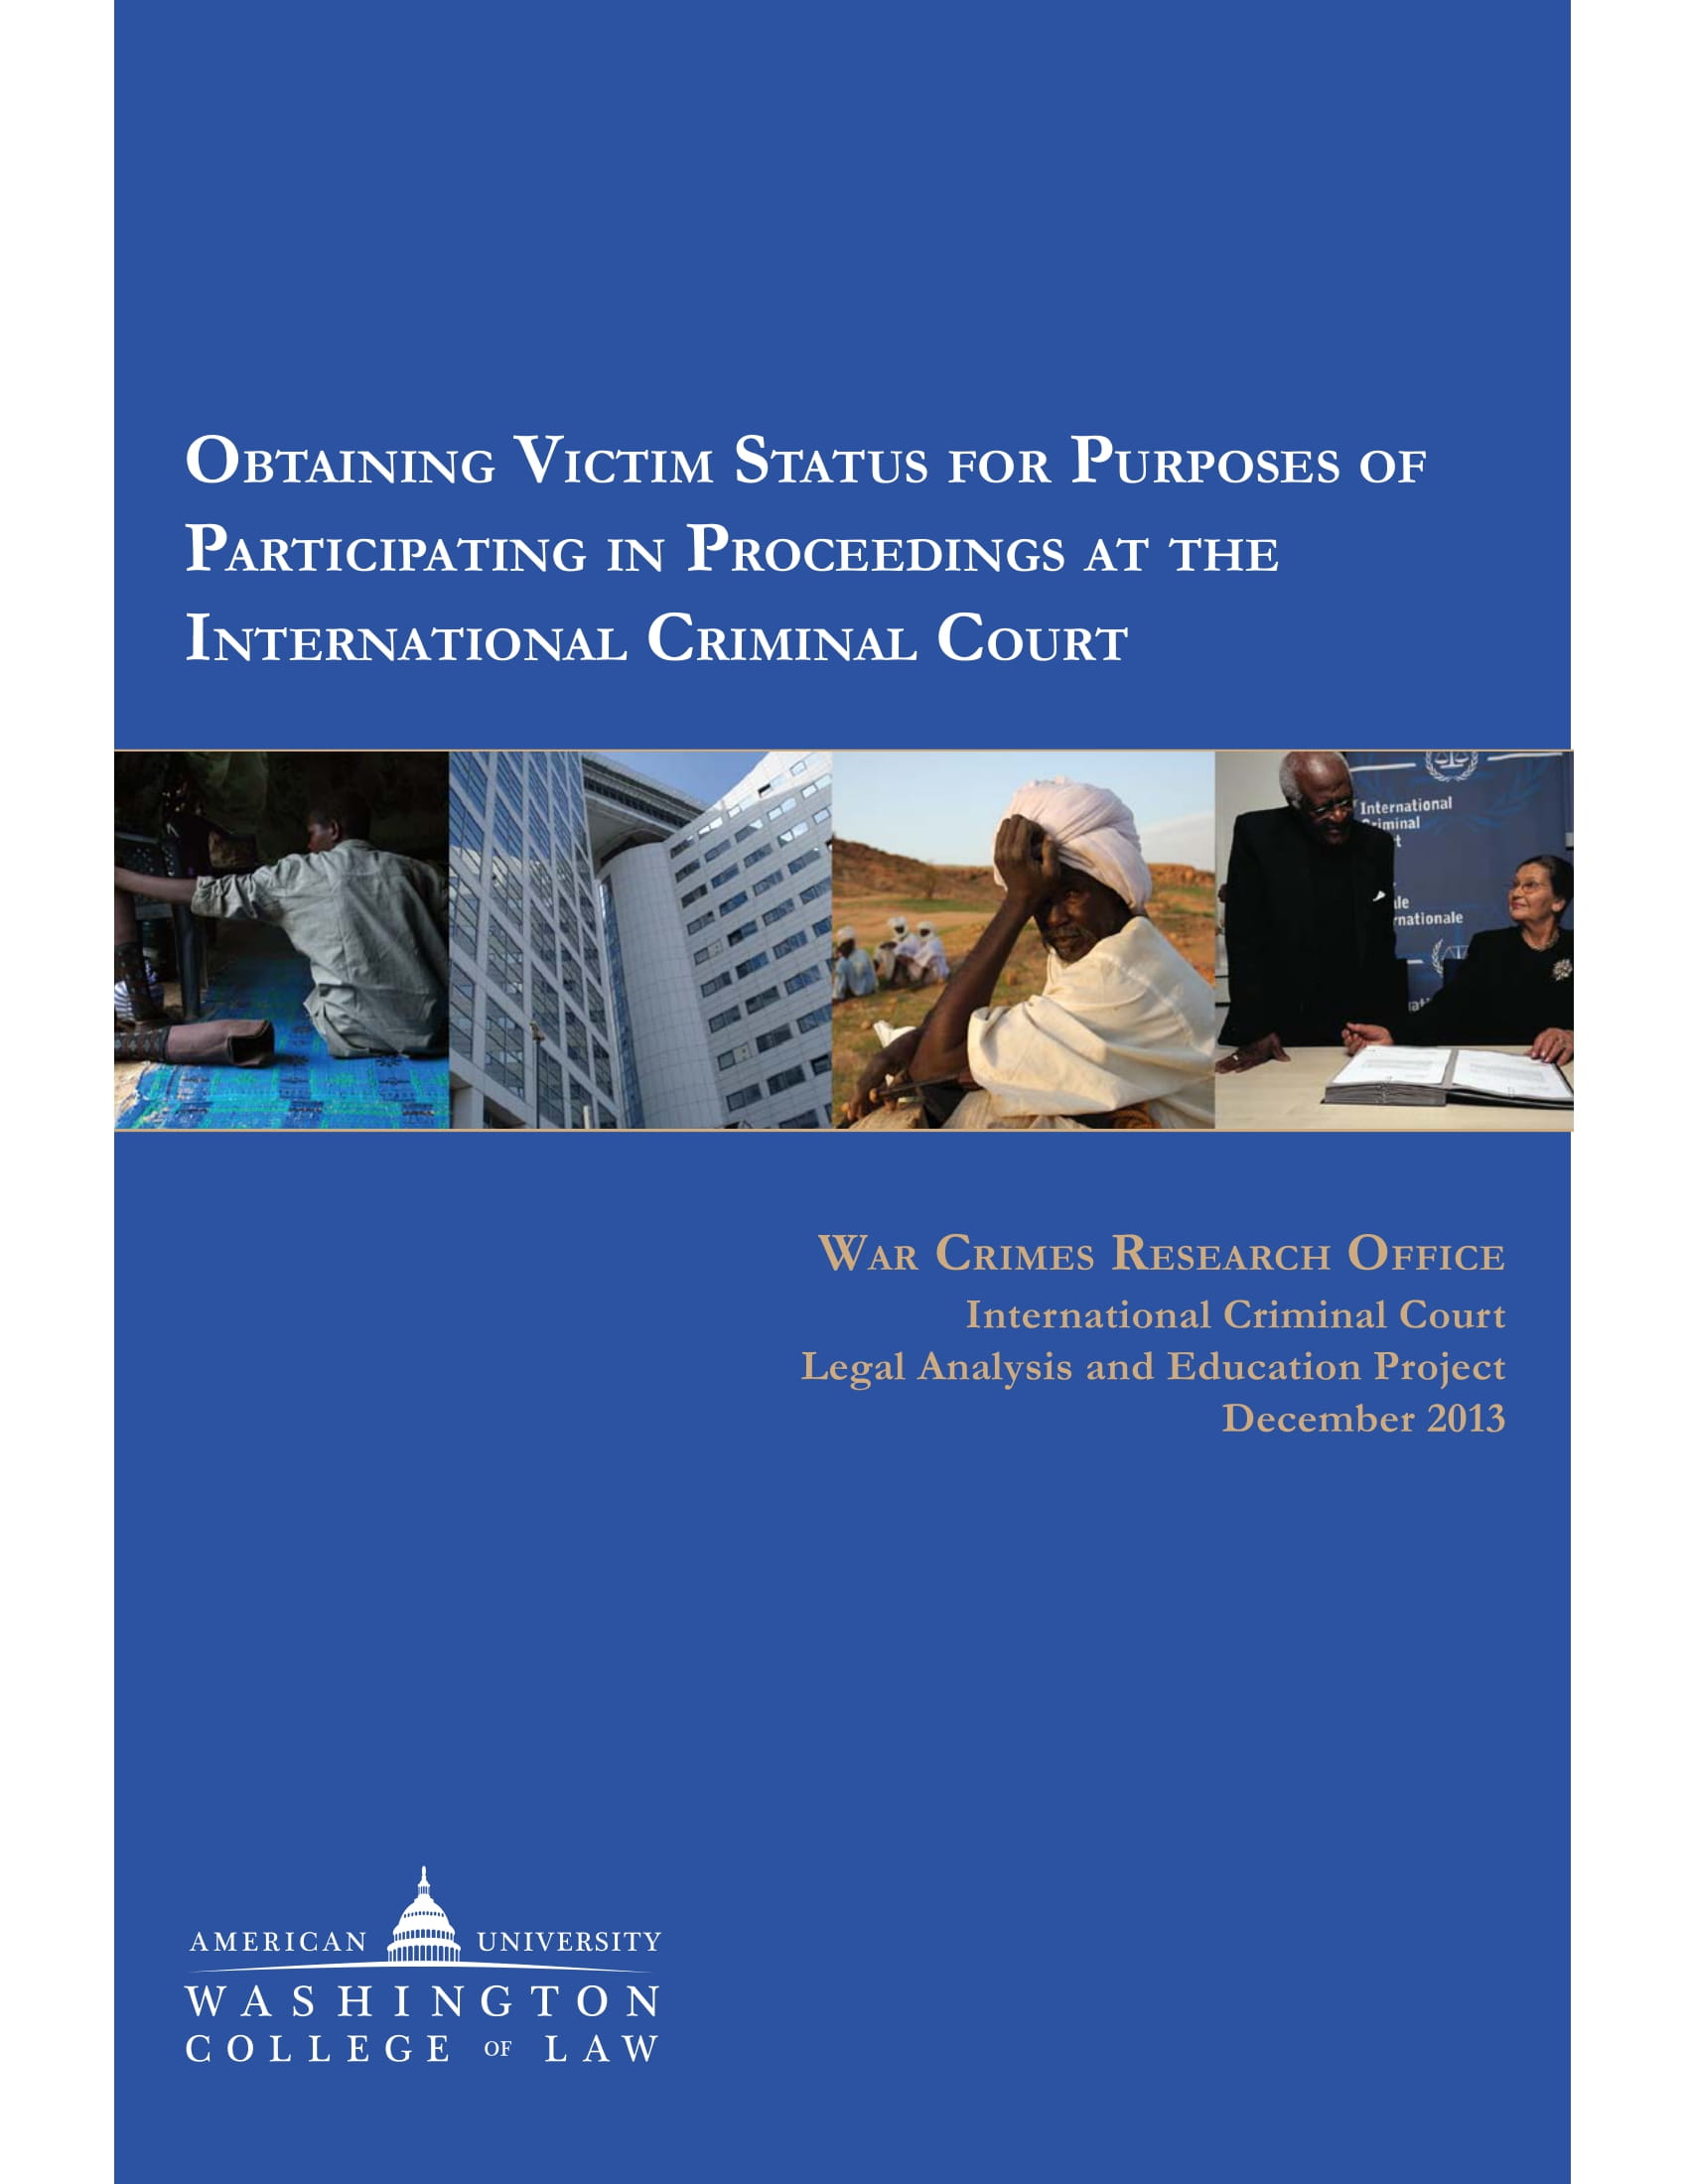 Report 18: Obtaining Victim Status for Purposes of Participating in Proceedings at the International Criminal Court